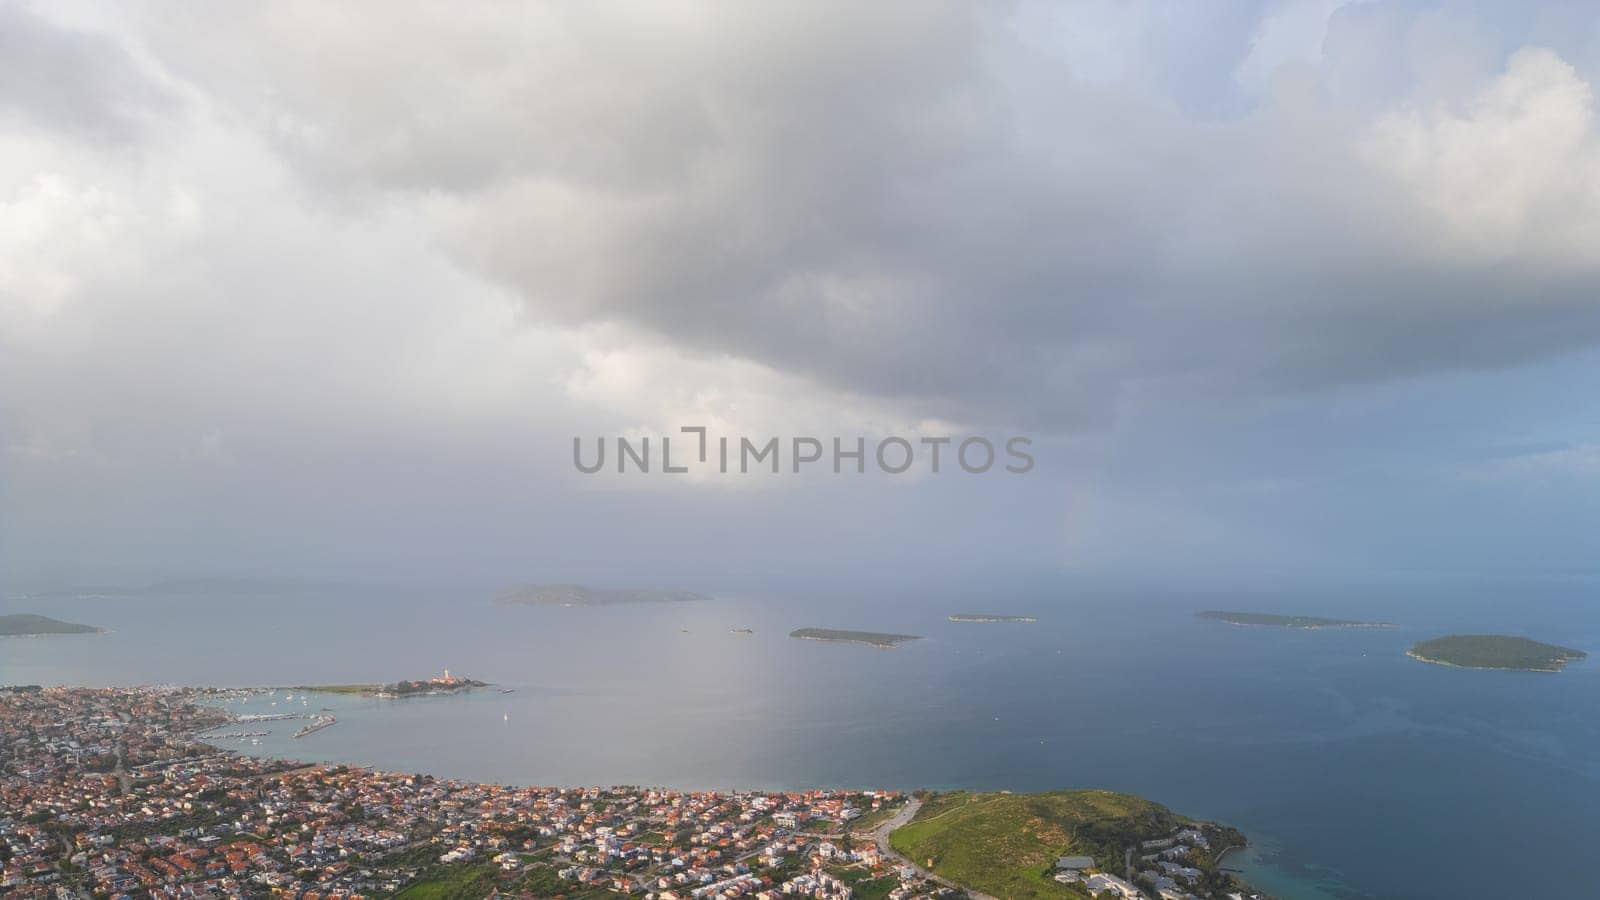 Urla Cesmealti aerial view with drone. Turkey's touristic seaside town in the Aegean. Urla , Cesmealti. High quality photo